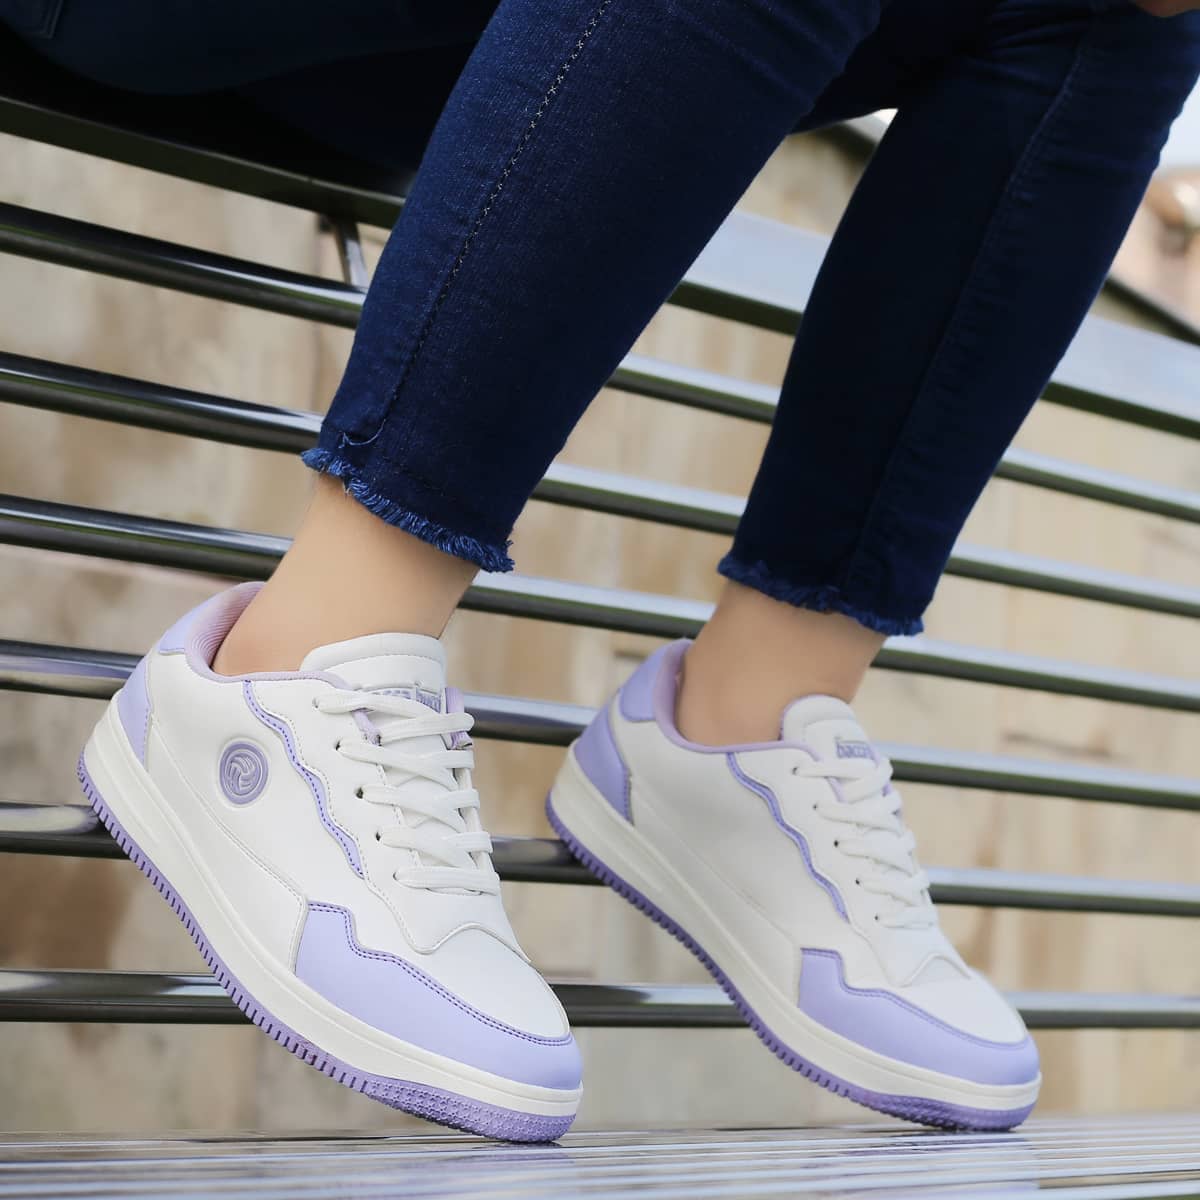 Buy Sneakers For Women: Raise-Wht | Campus Shoes